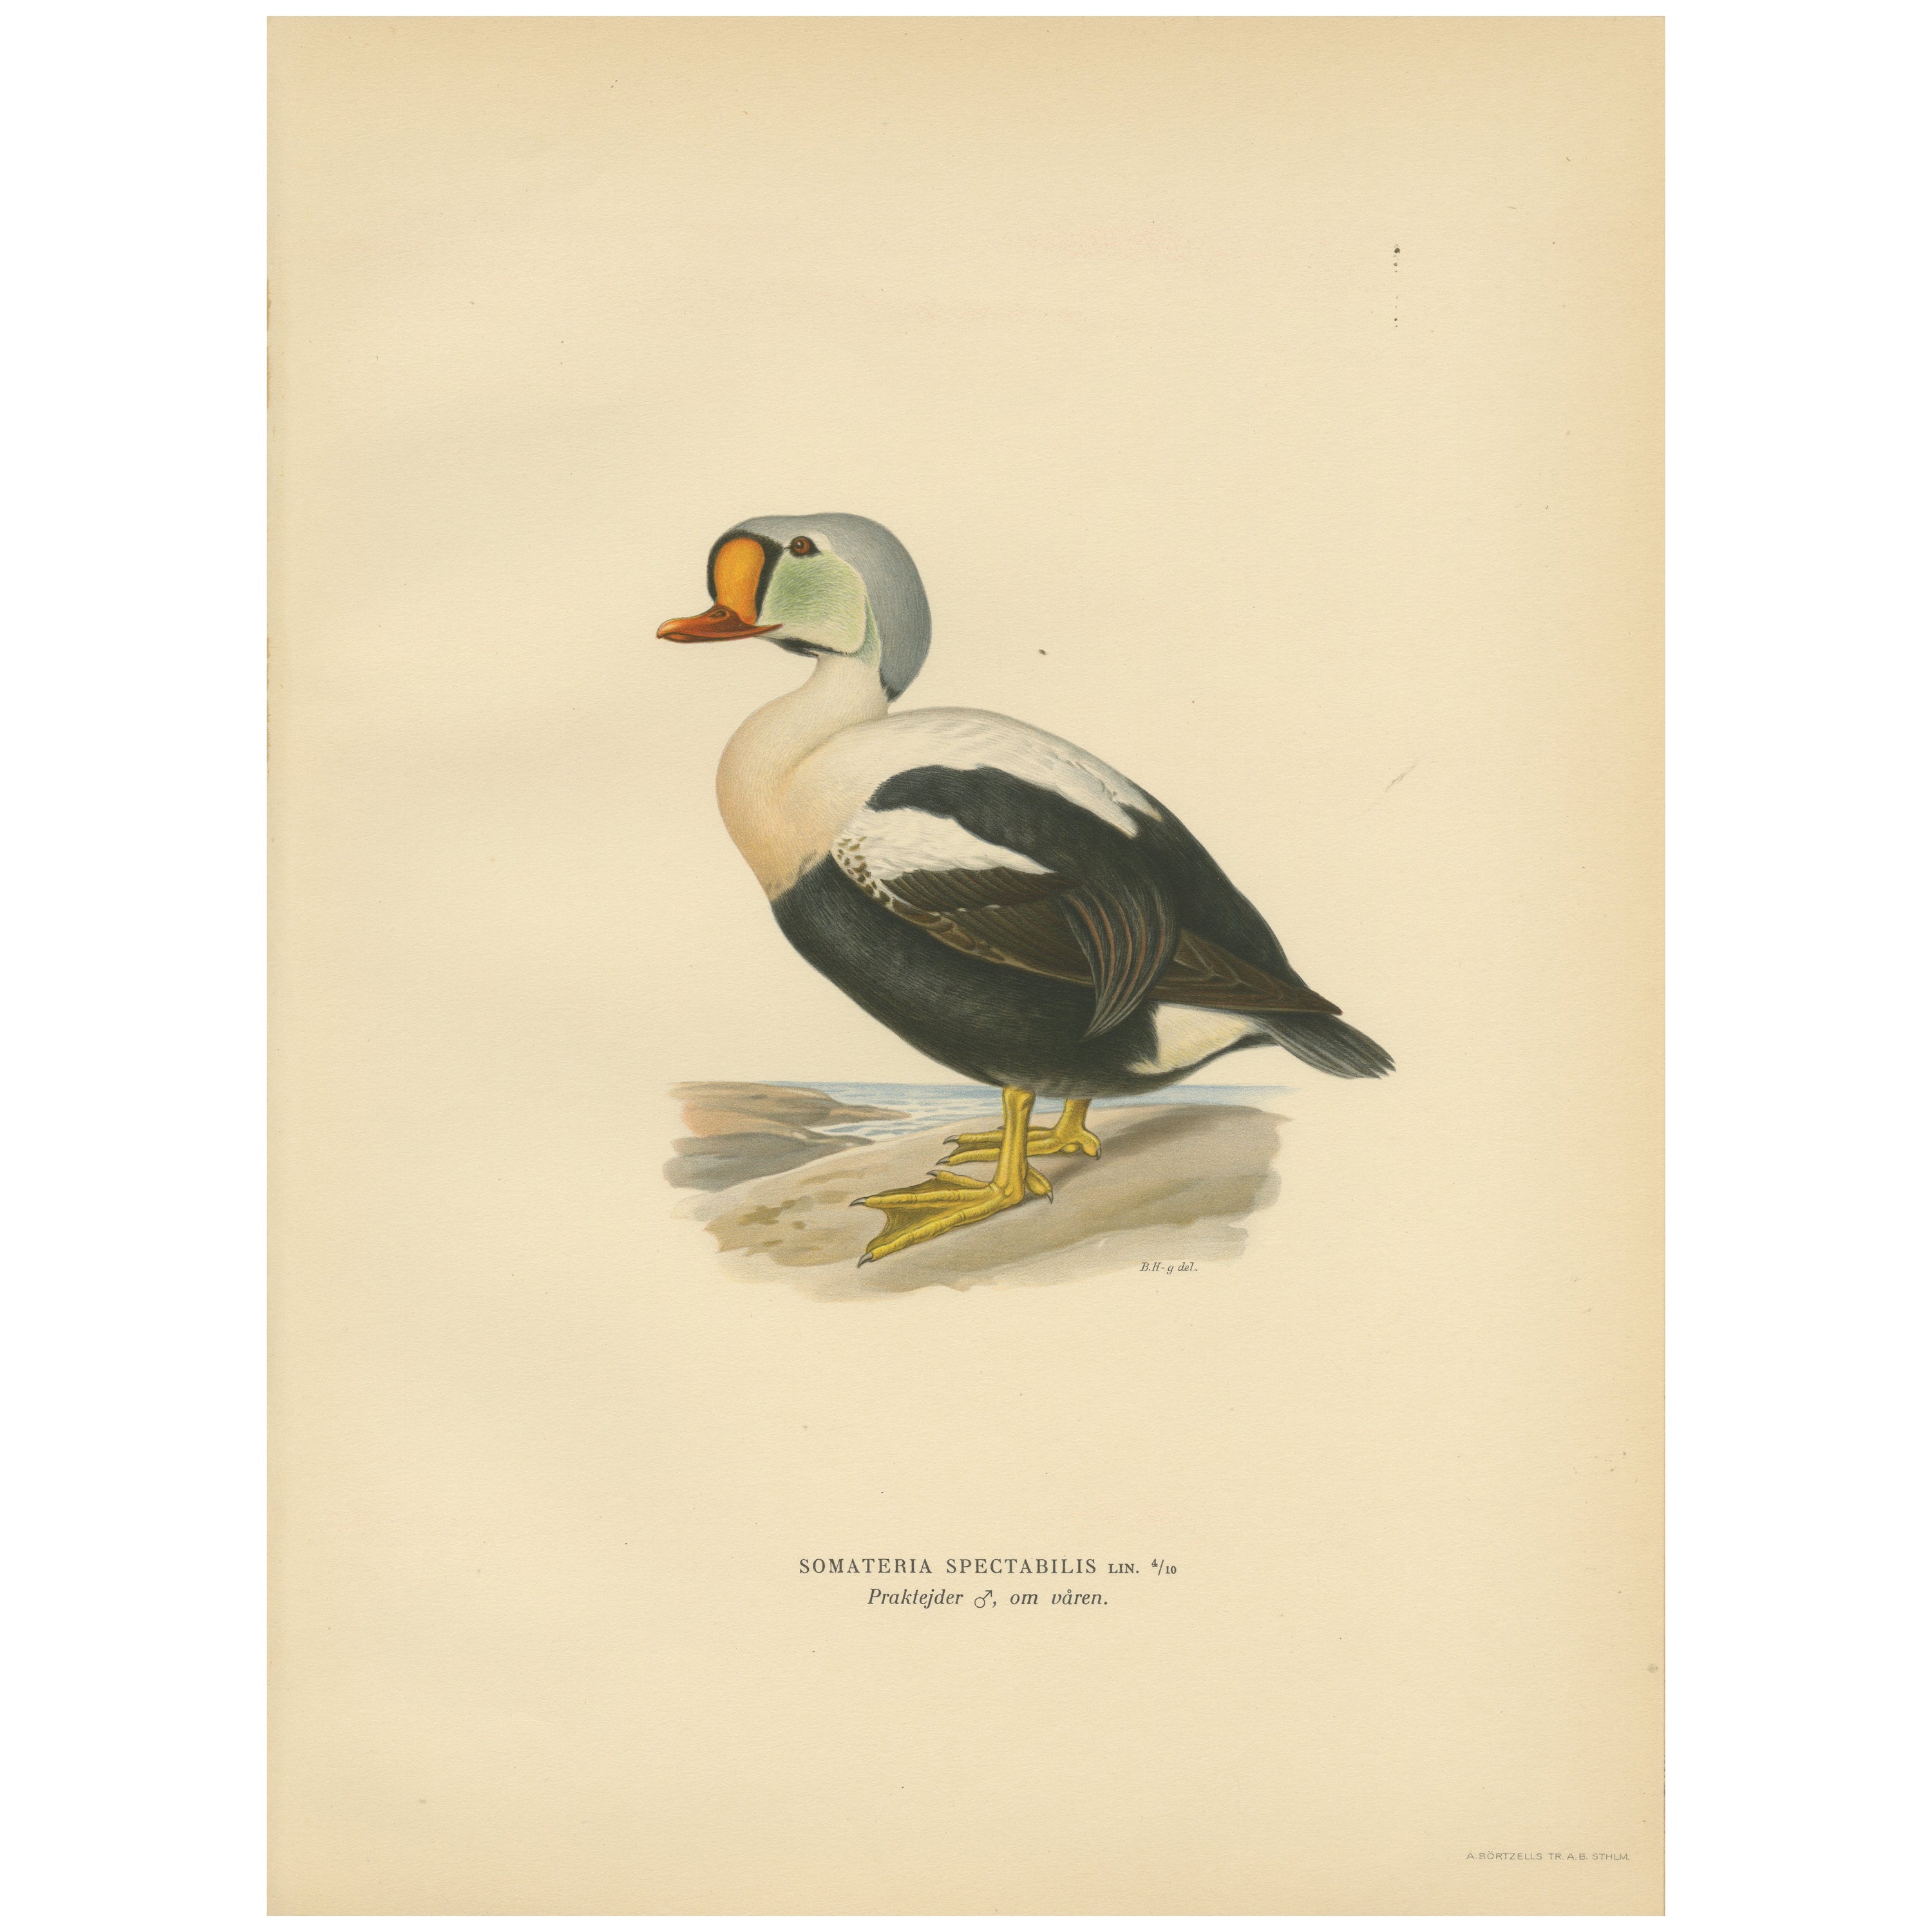 King Eider in Repose: The Somateria Spectabilis from the Nordic Aviary, 1929